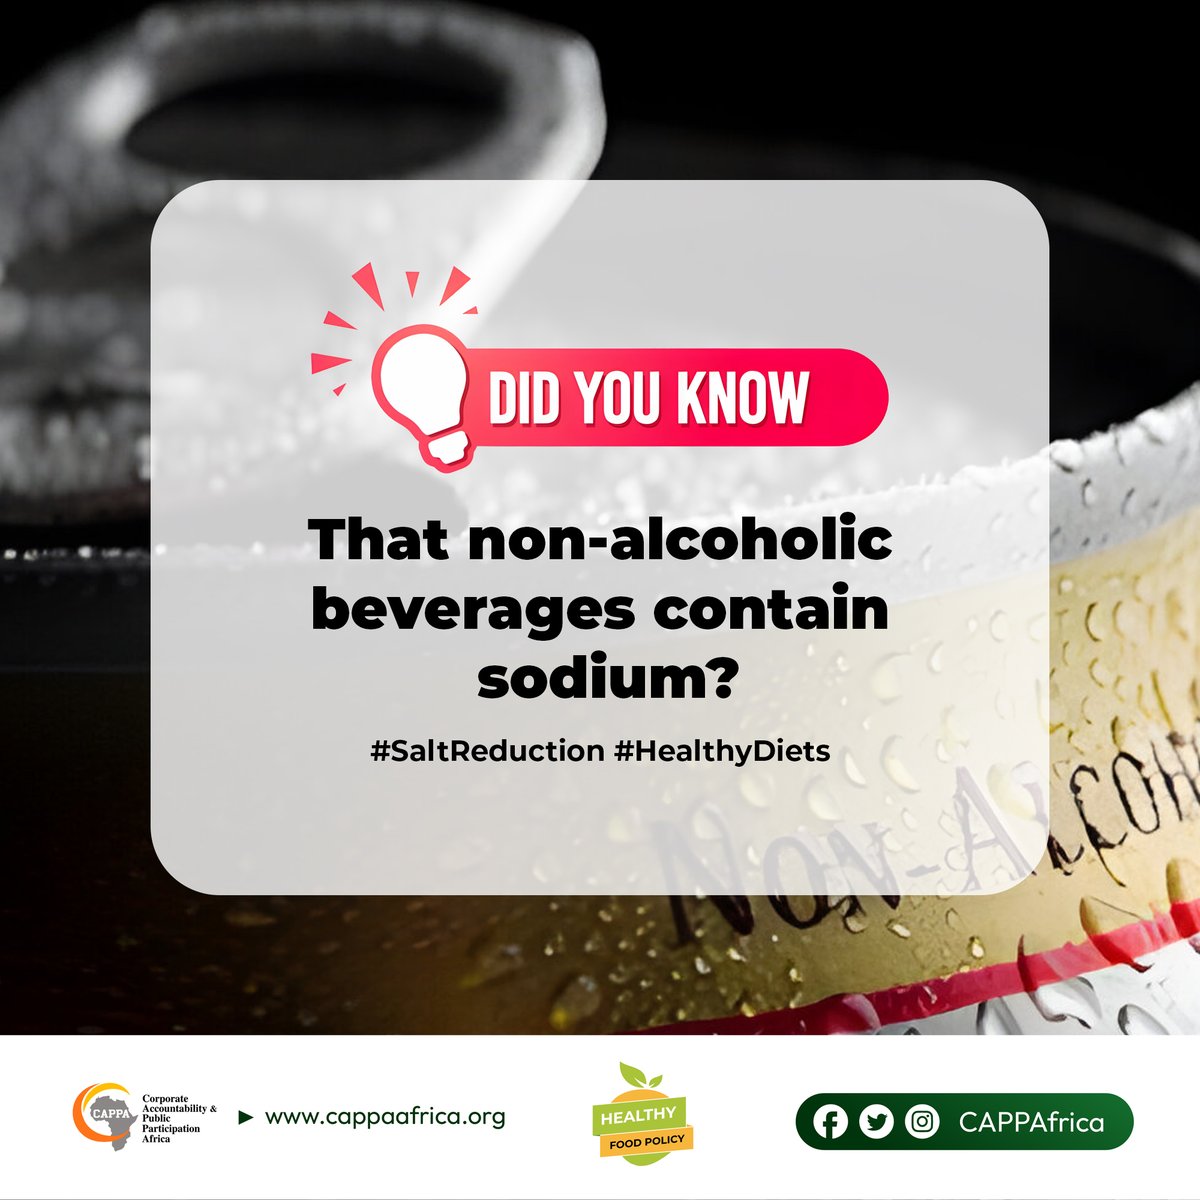 Always read the nutrition fact labels and choose beverages that contain low sodium. #SaltReduction #HealthyDiets